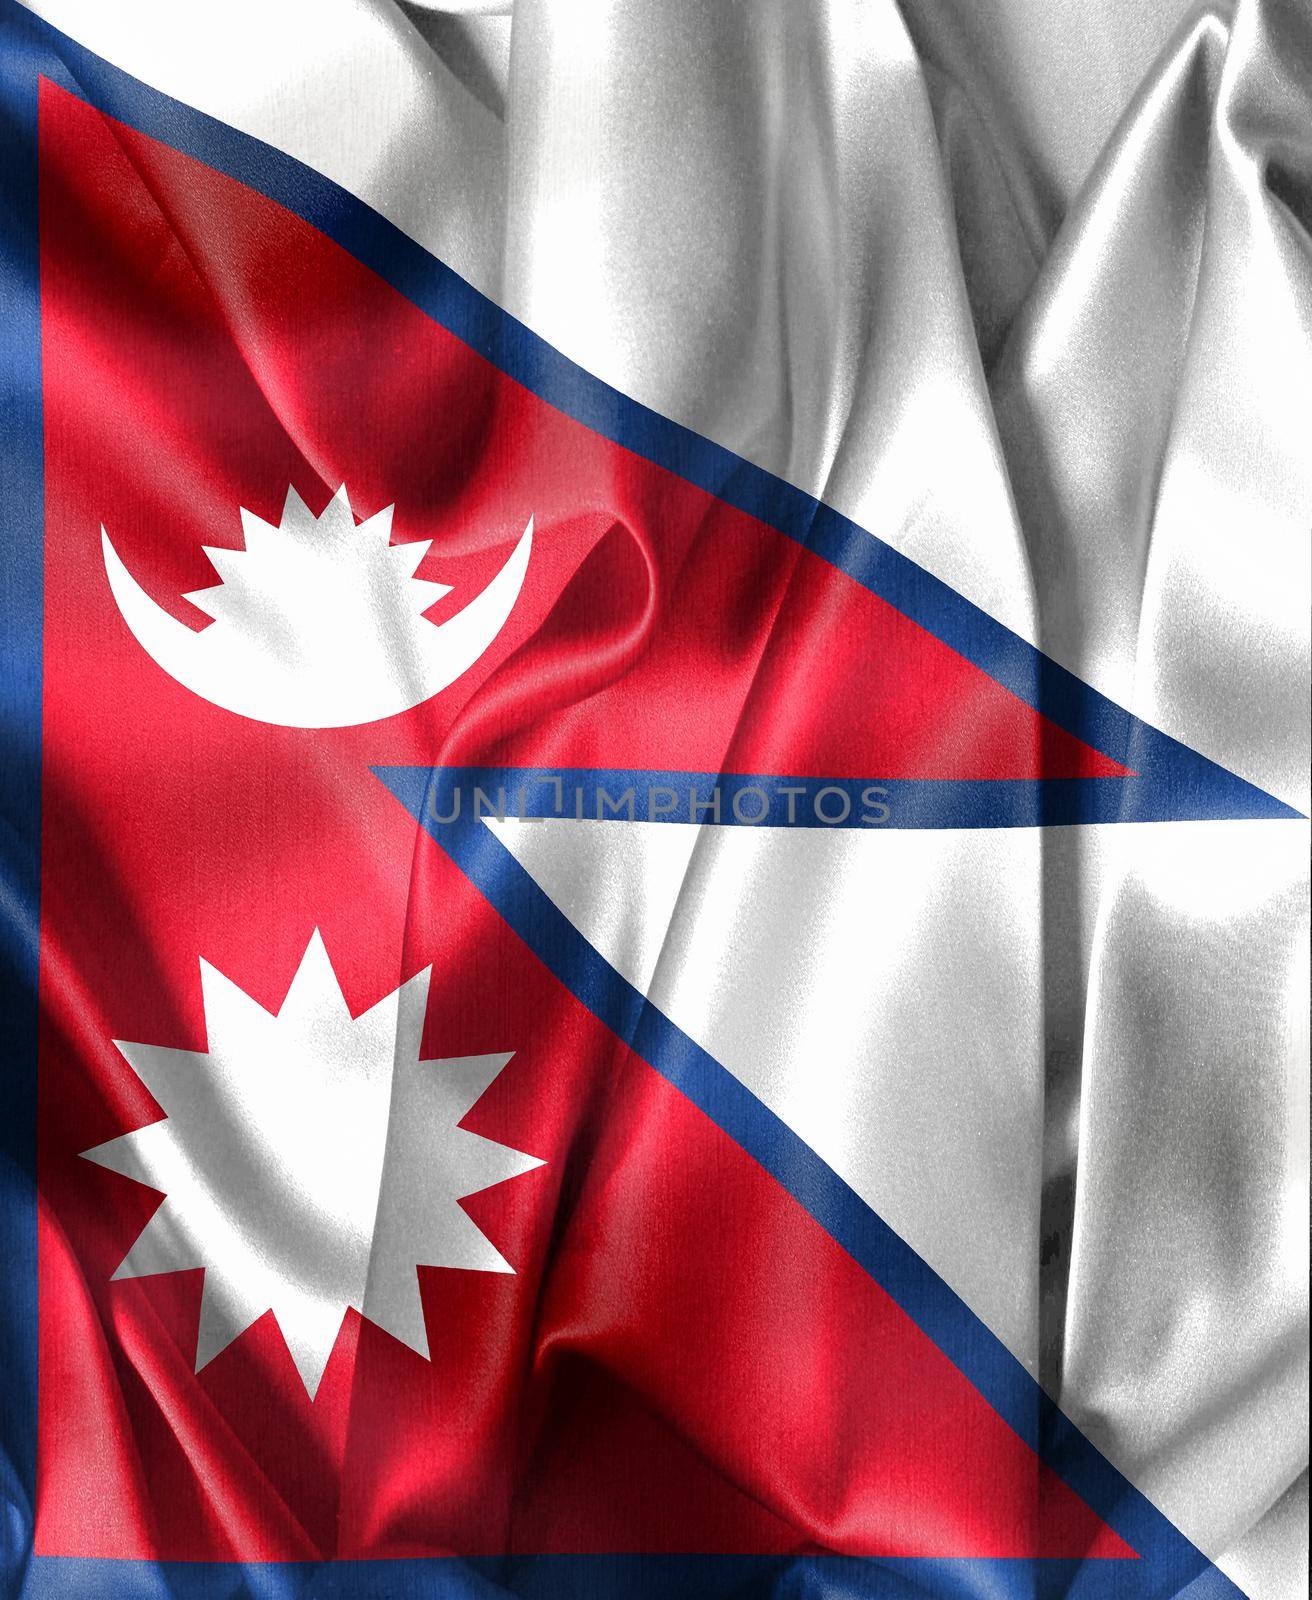 3D-Illustration of a Nepal flag - realistic waving fabric flag by MP_foto71